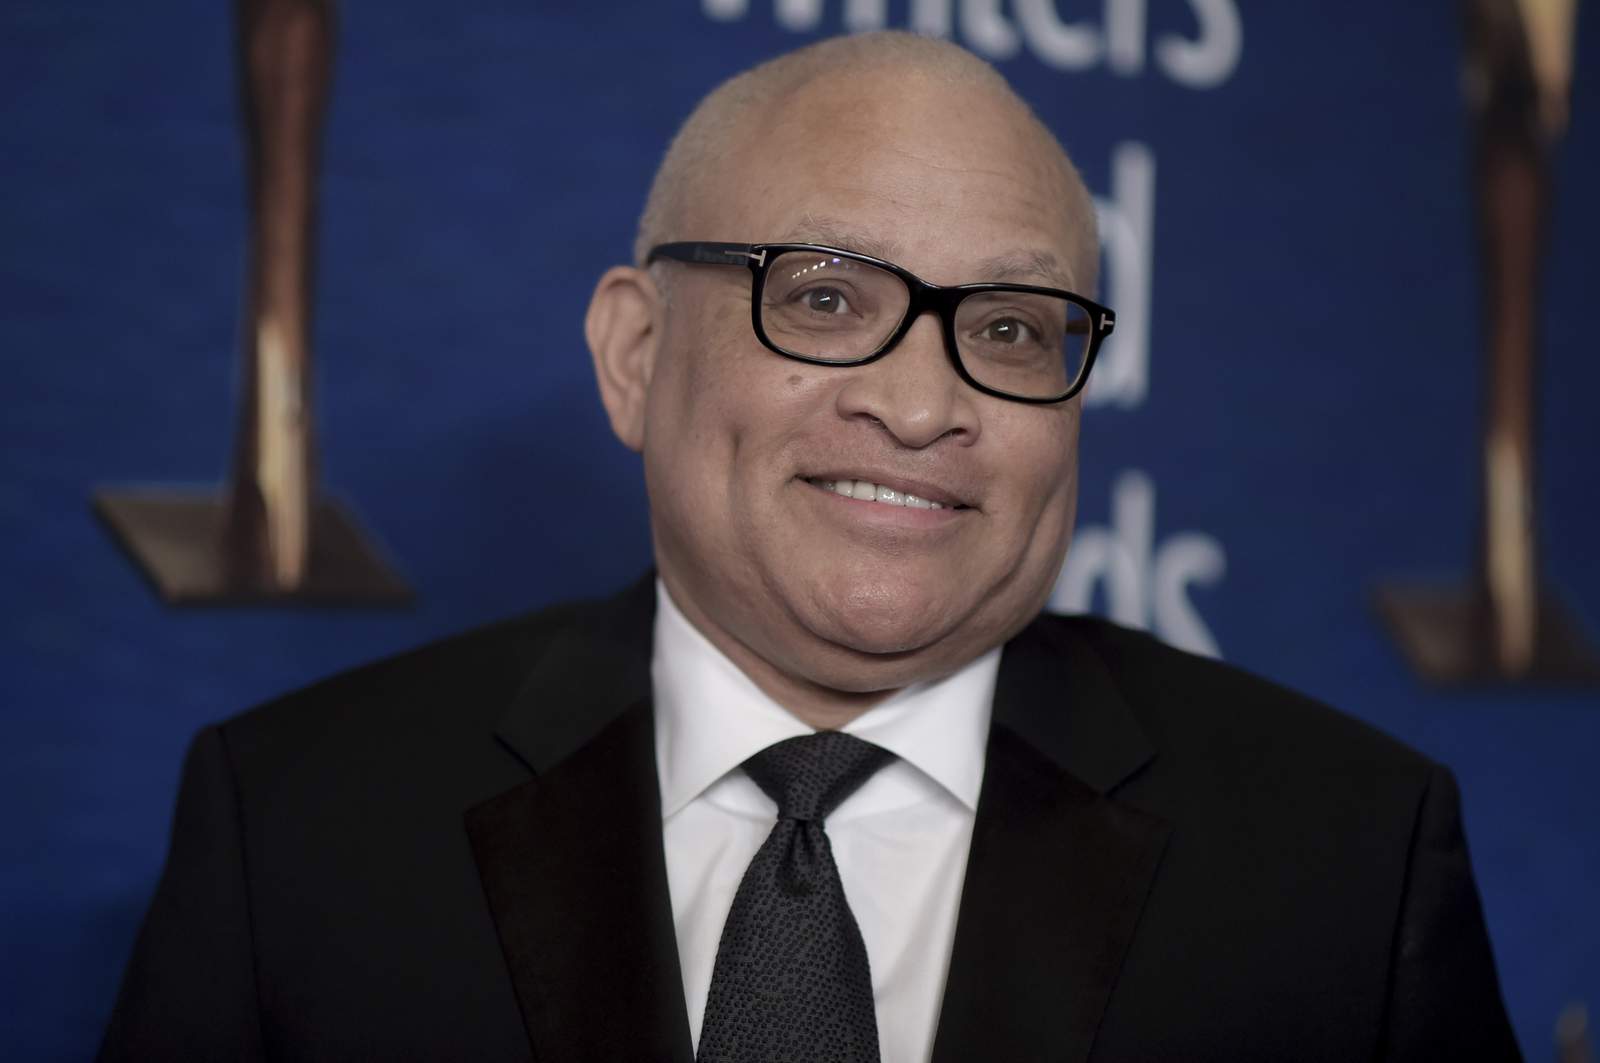 Larry Wilmore, Amber Ruffin anchor weekly late-night shows